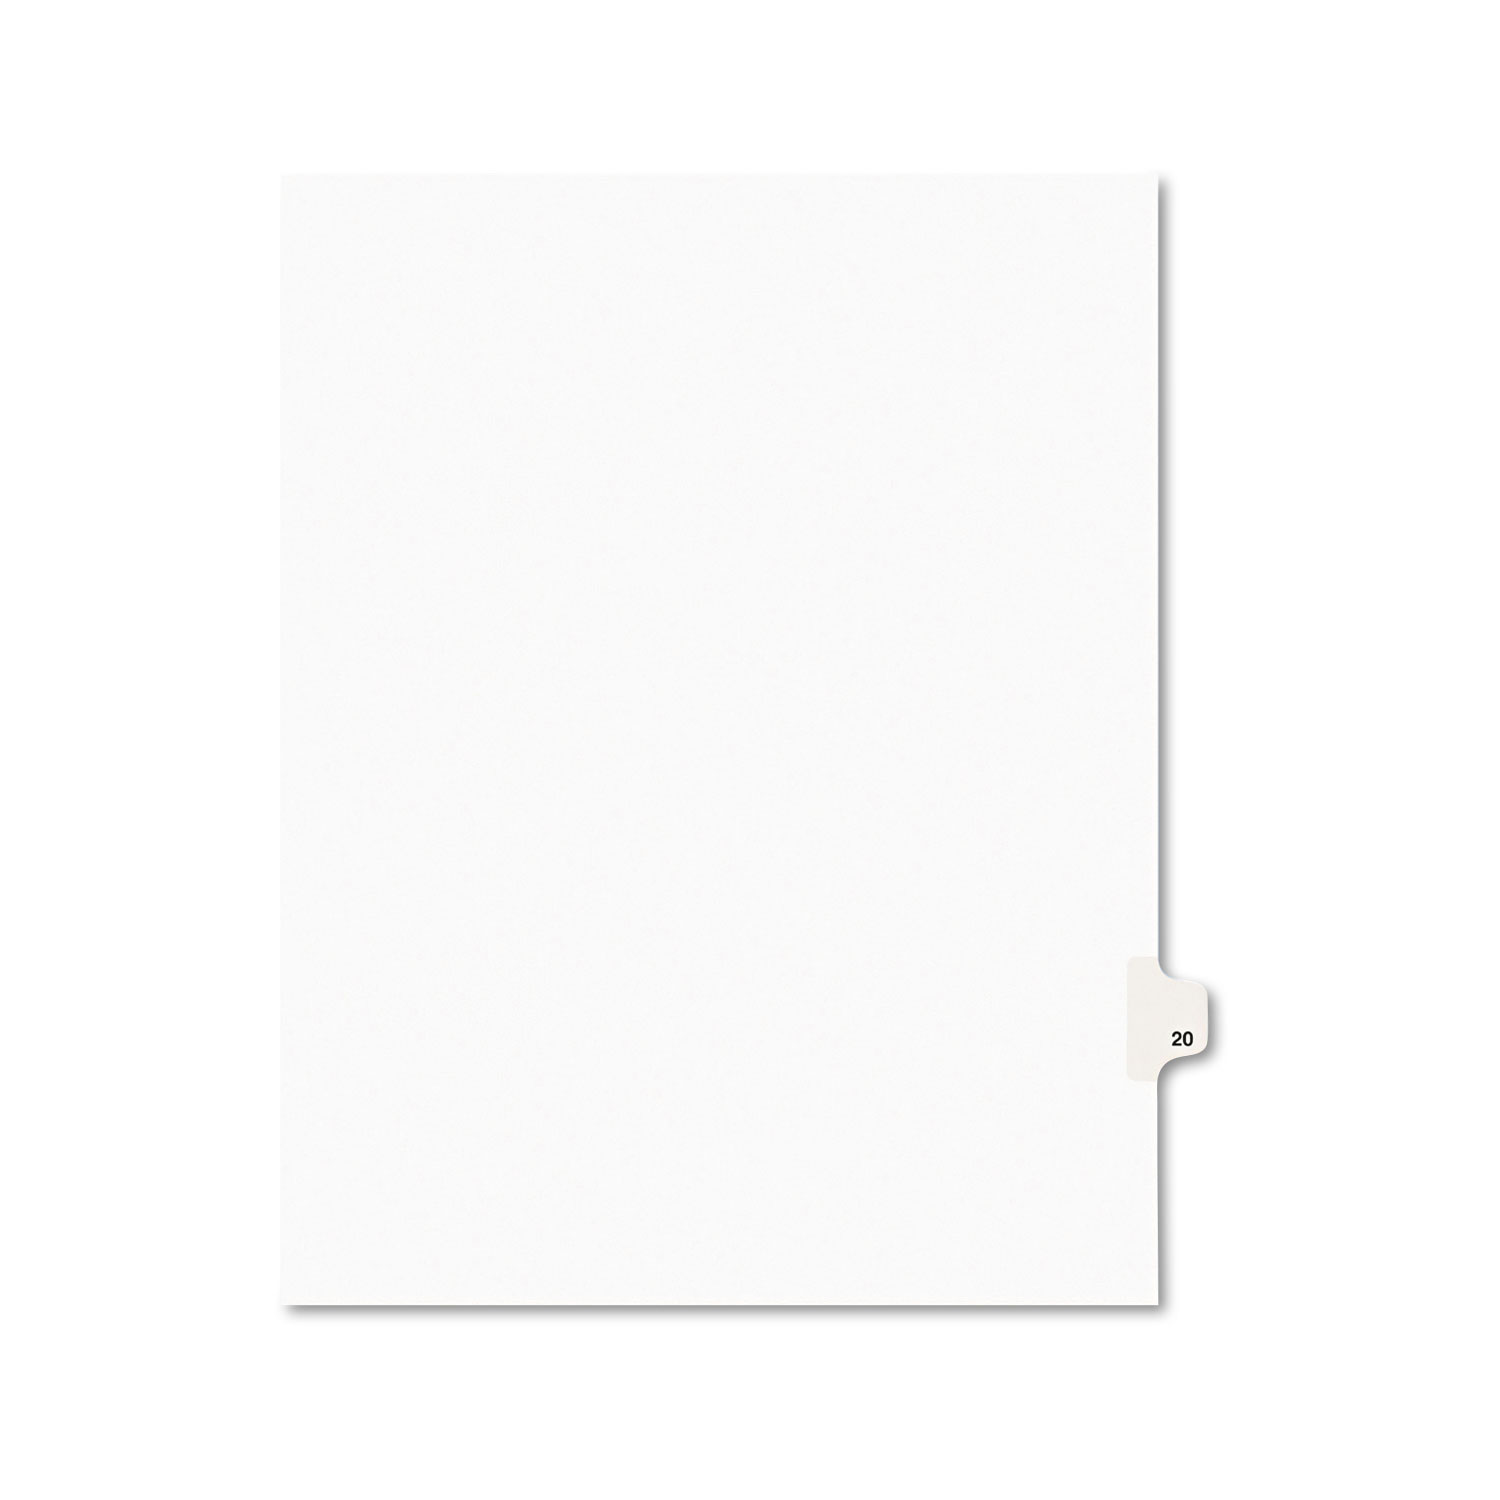  Avery 01020 Preprinted Legal Exhibit Side Tab Index Dividers, Avery Style, 10-Tab, 20, 11 x 8.5, White, 25/Pack (AVE01020) 